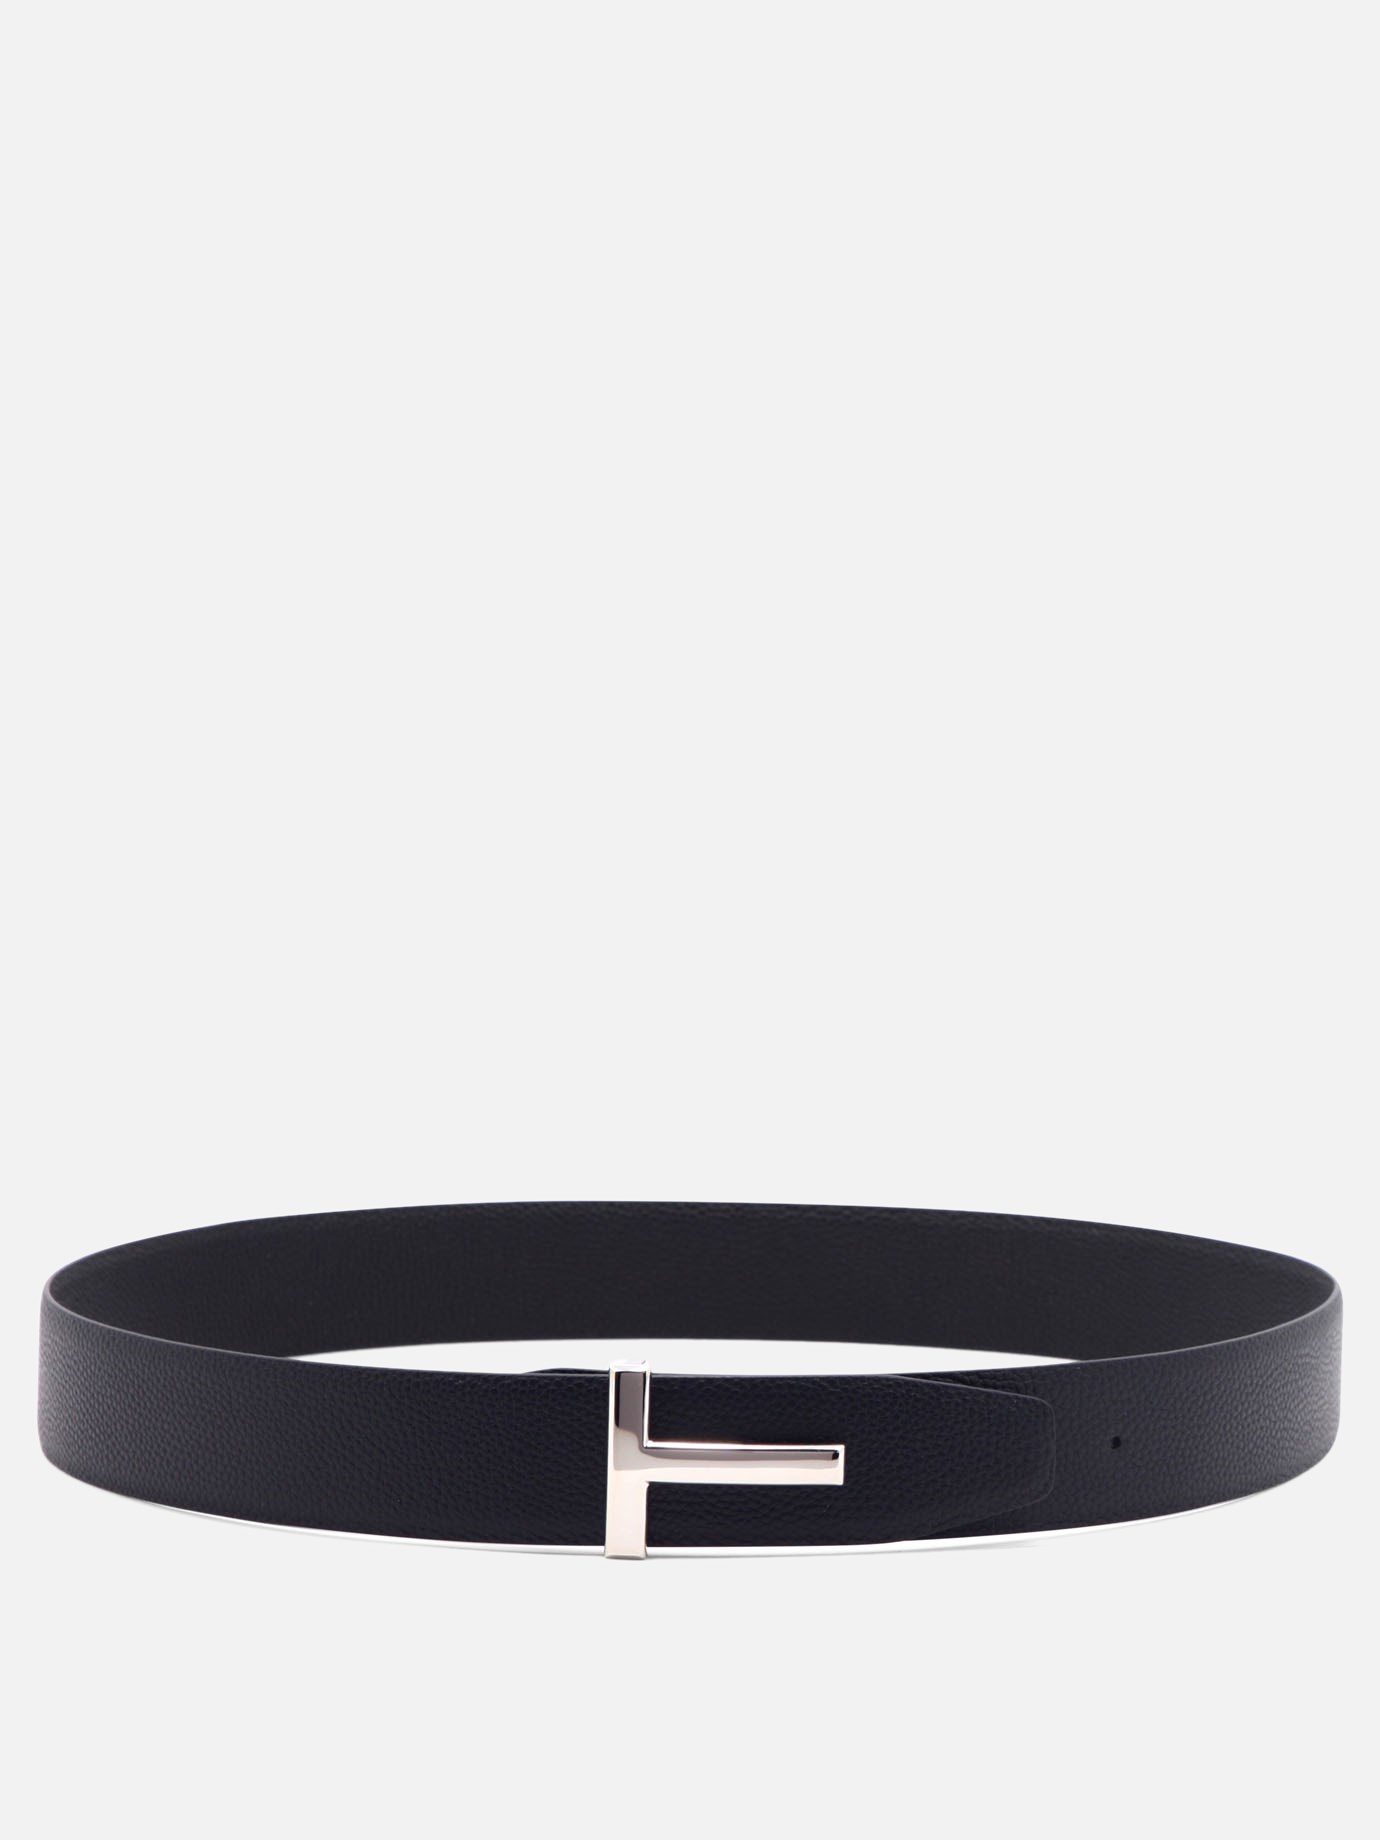  T-Icon  reversible beltby Tom Ford - 2